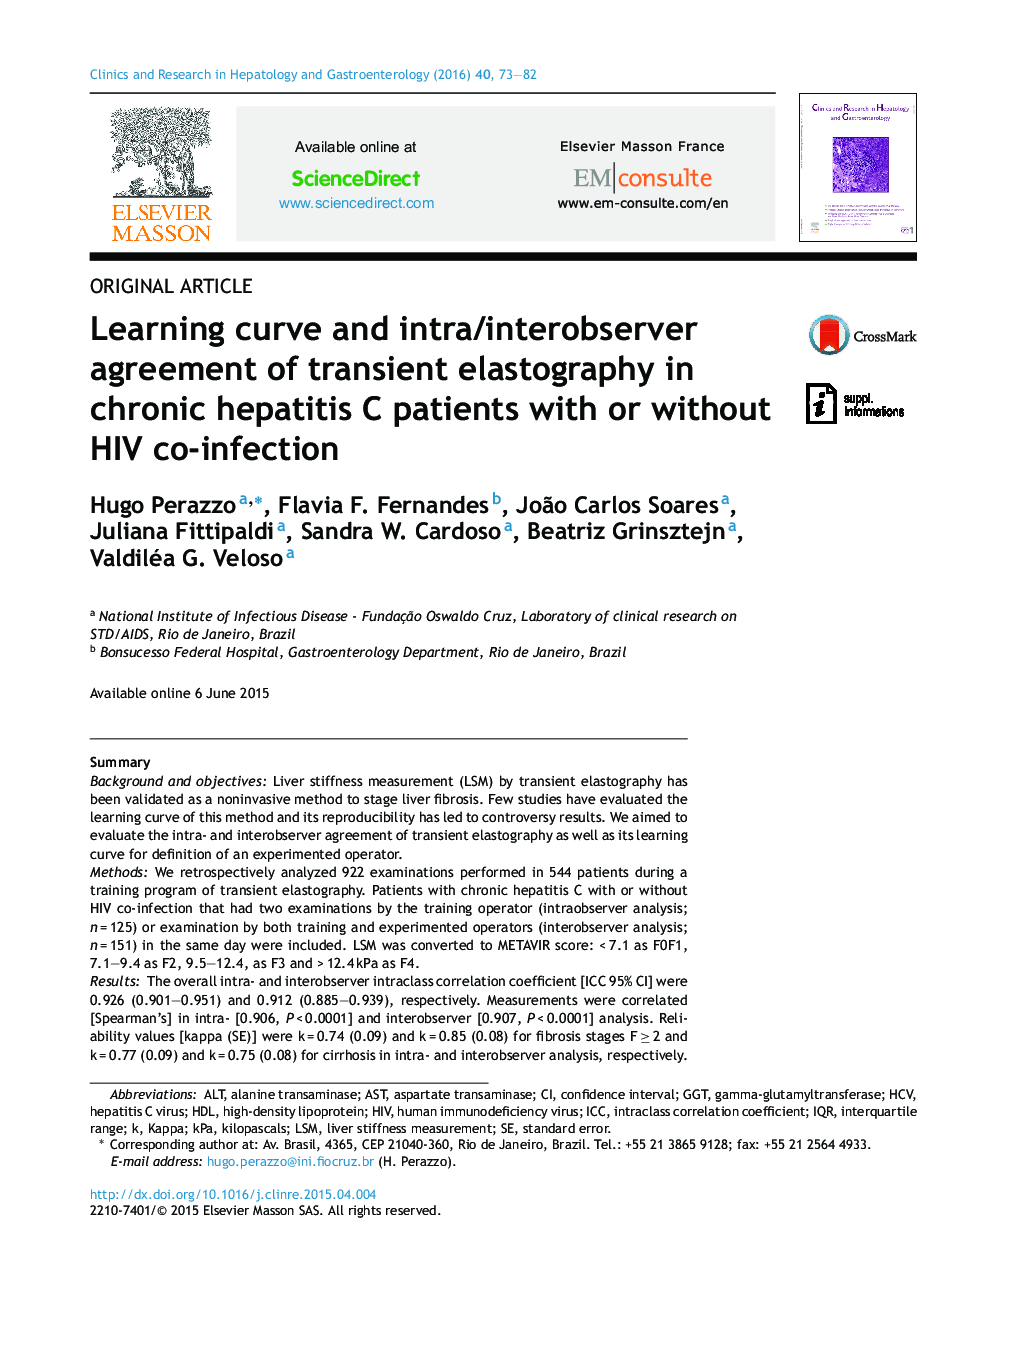 Learning curve and intra/interobserver agreement of transient elastography in chronic hepatitis C patients with or without HIV co-infection